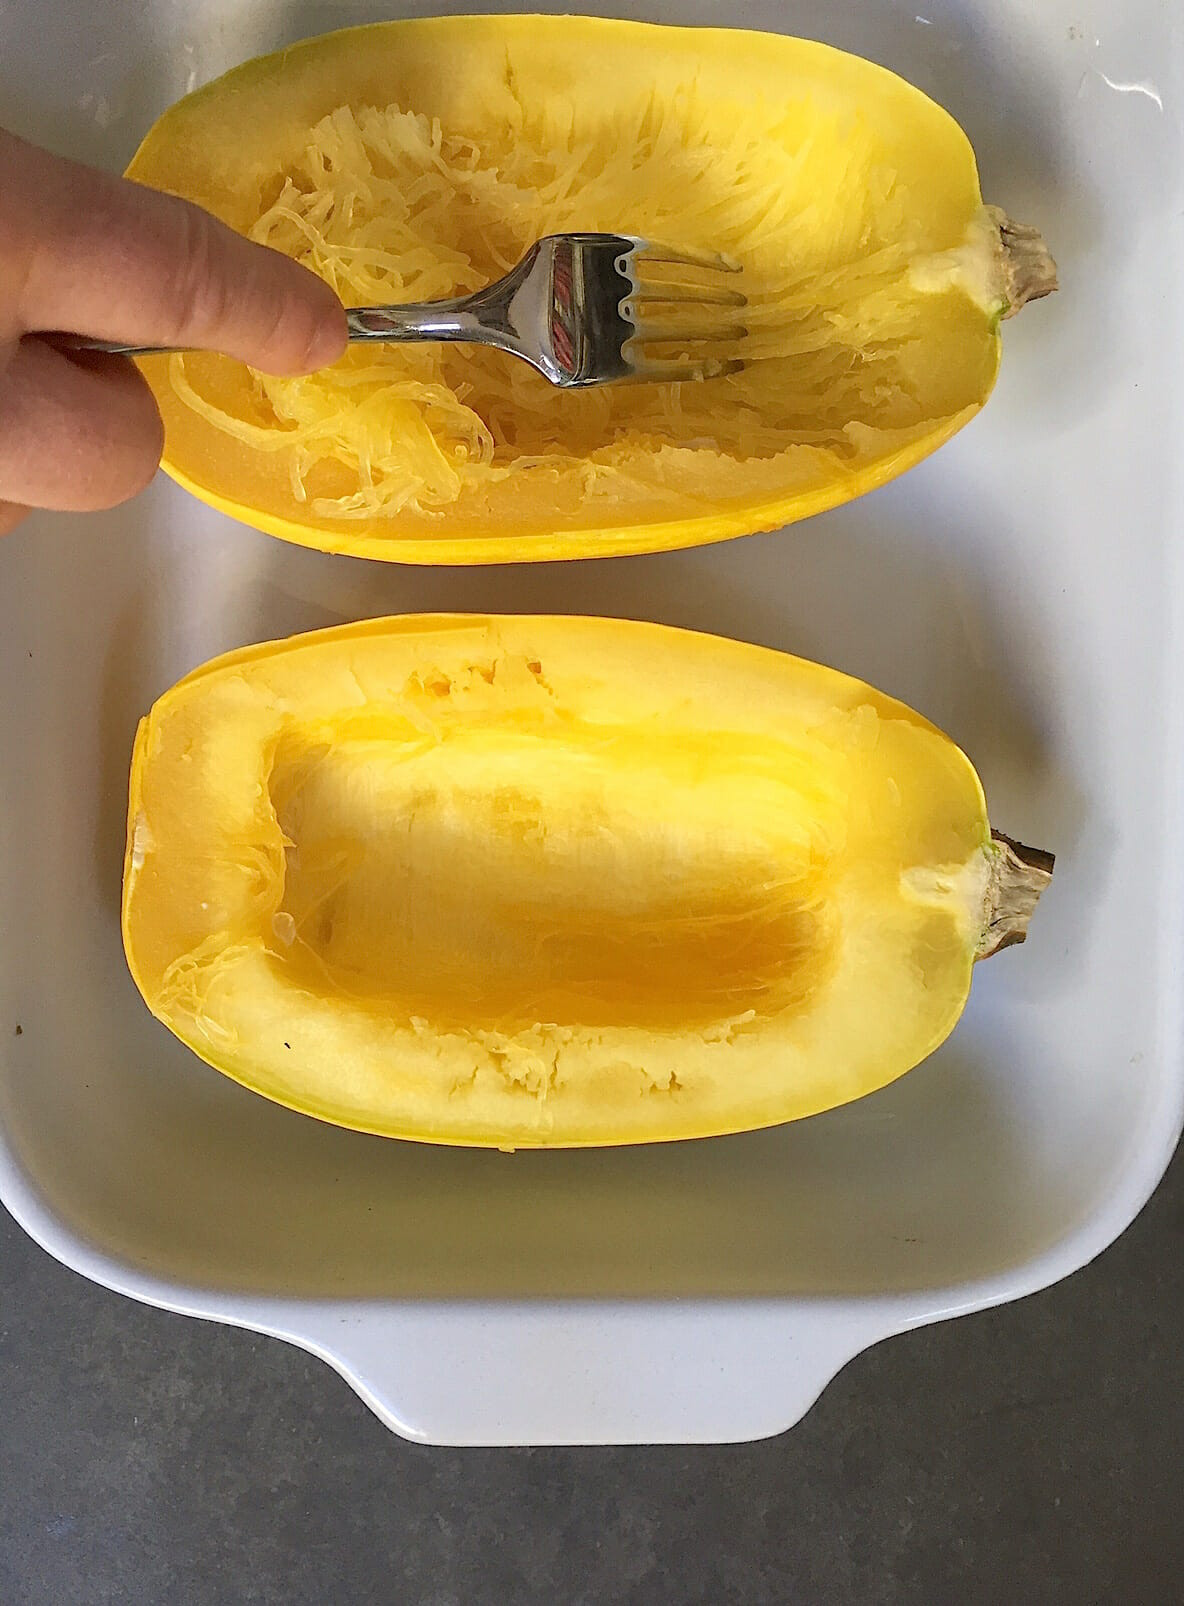 Cooking Spaghetti Squash In Microwave
 How to Cook Spaghetti Squash in the Microwave in just a